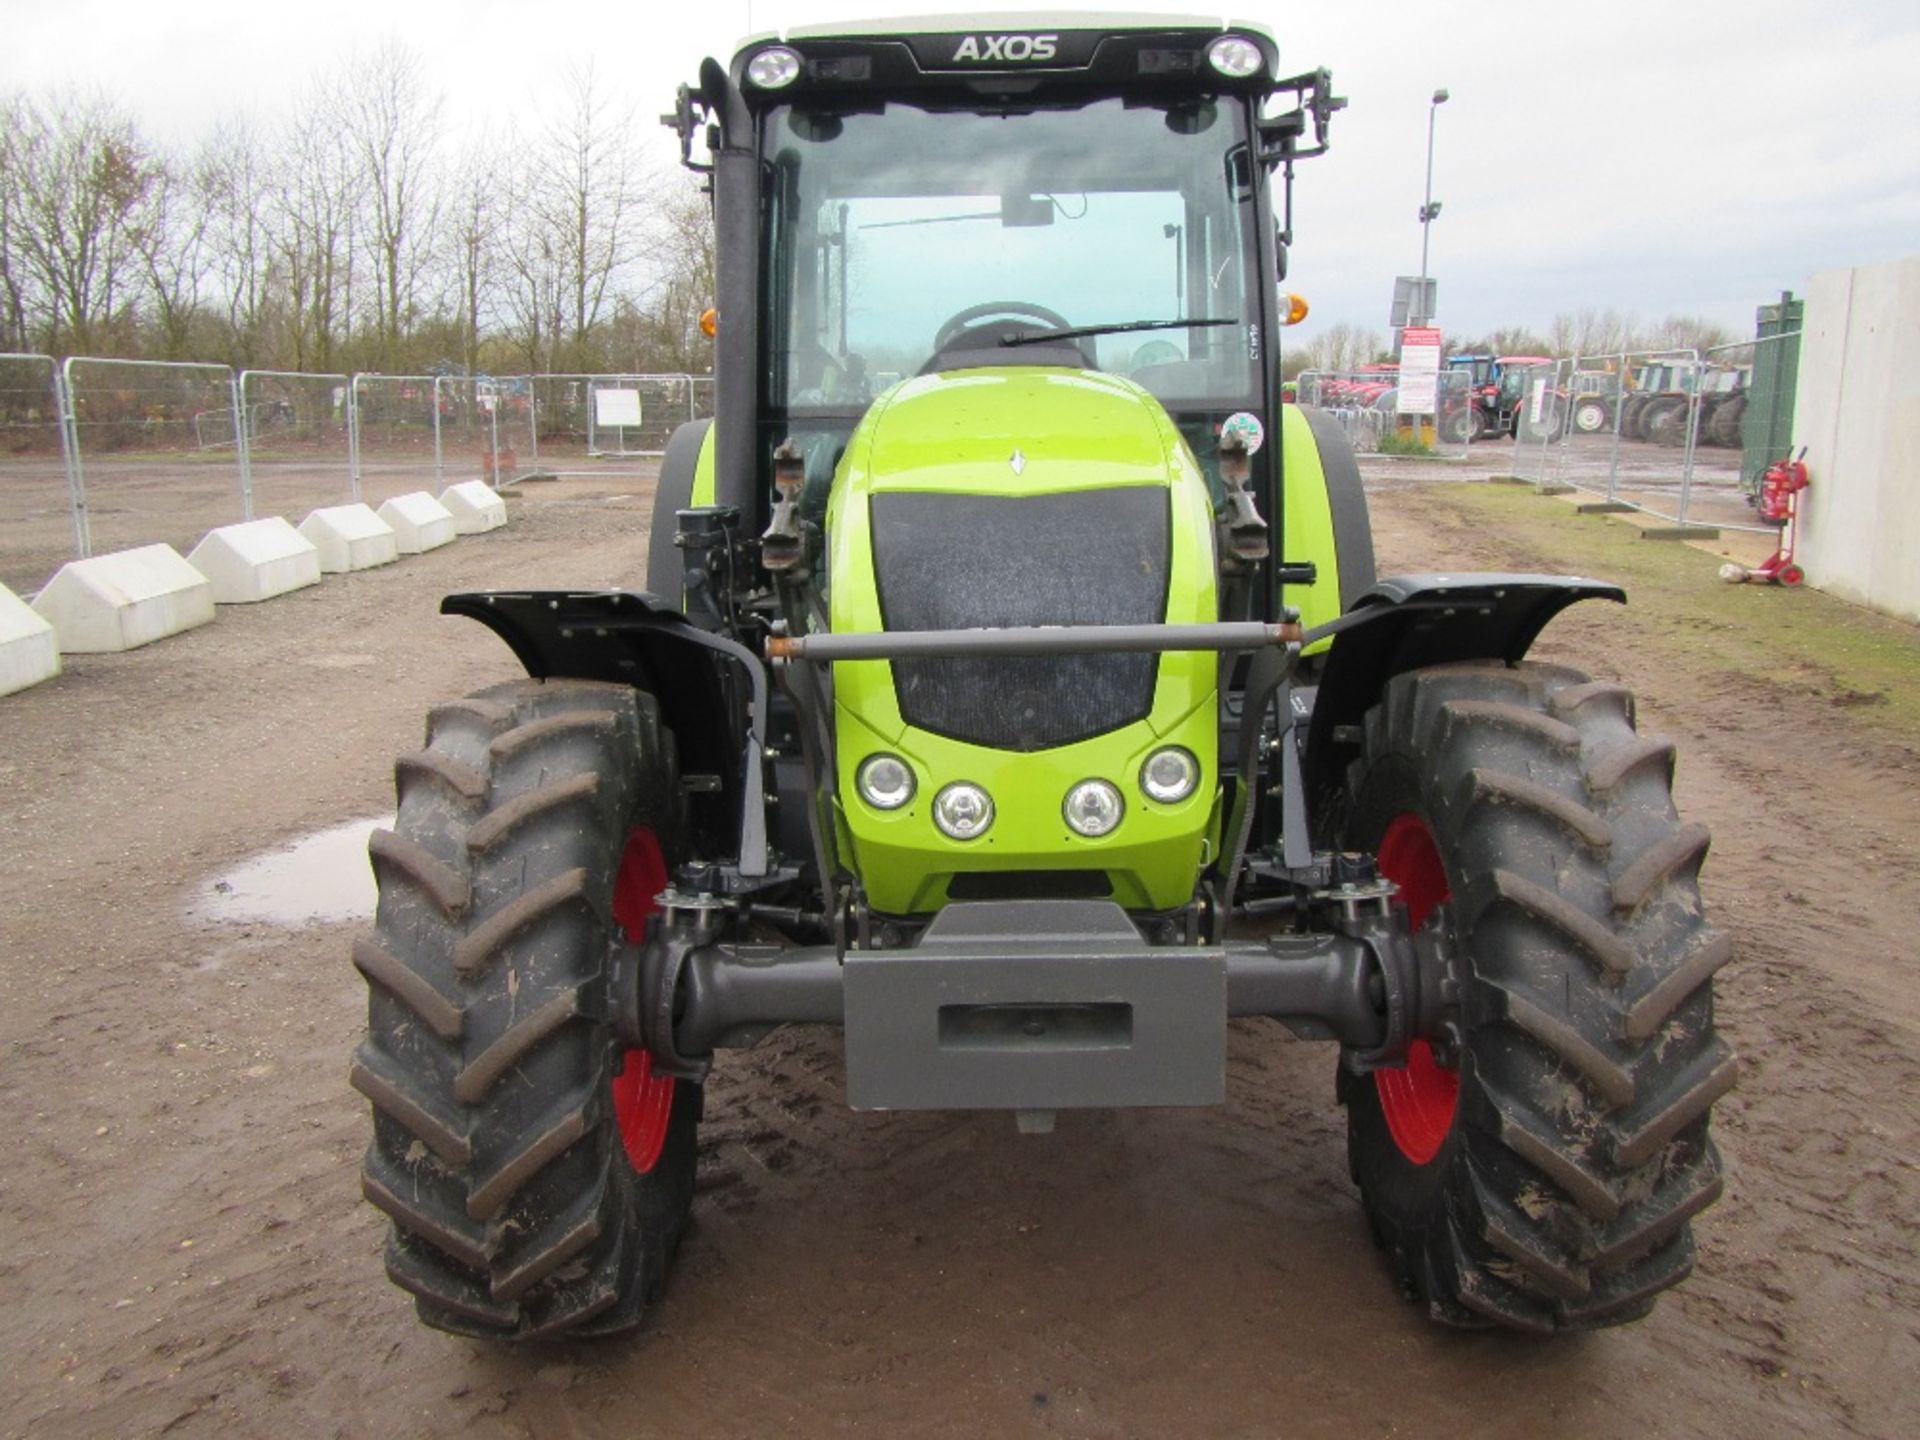 2014 Claas Axos 340C Tractor c/w Loader 500 Hrs Reg No GN64 CZF Ser No 2220597 - Image 2 of 17